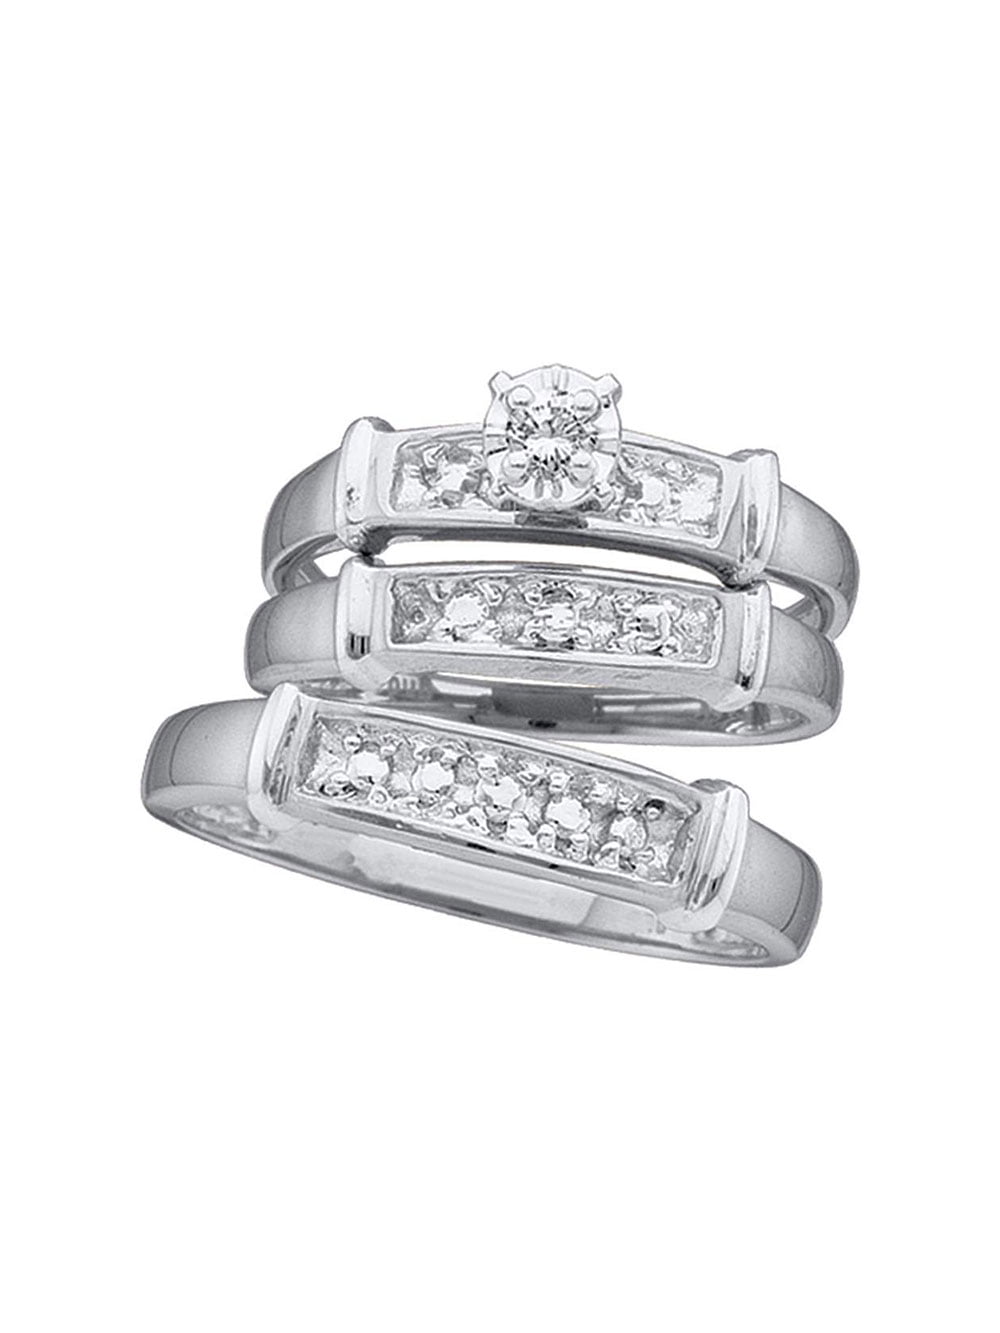 His Her Matching Couple's Wedding Bridal Ring Set In Solid 925 Sterling Silver 